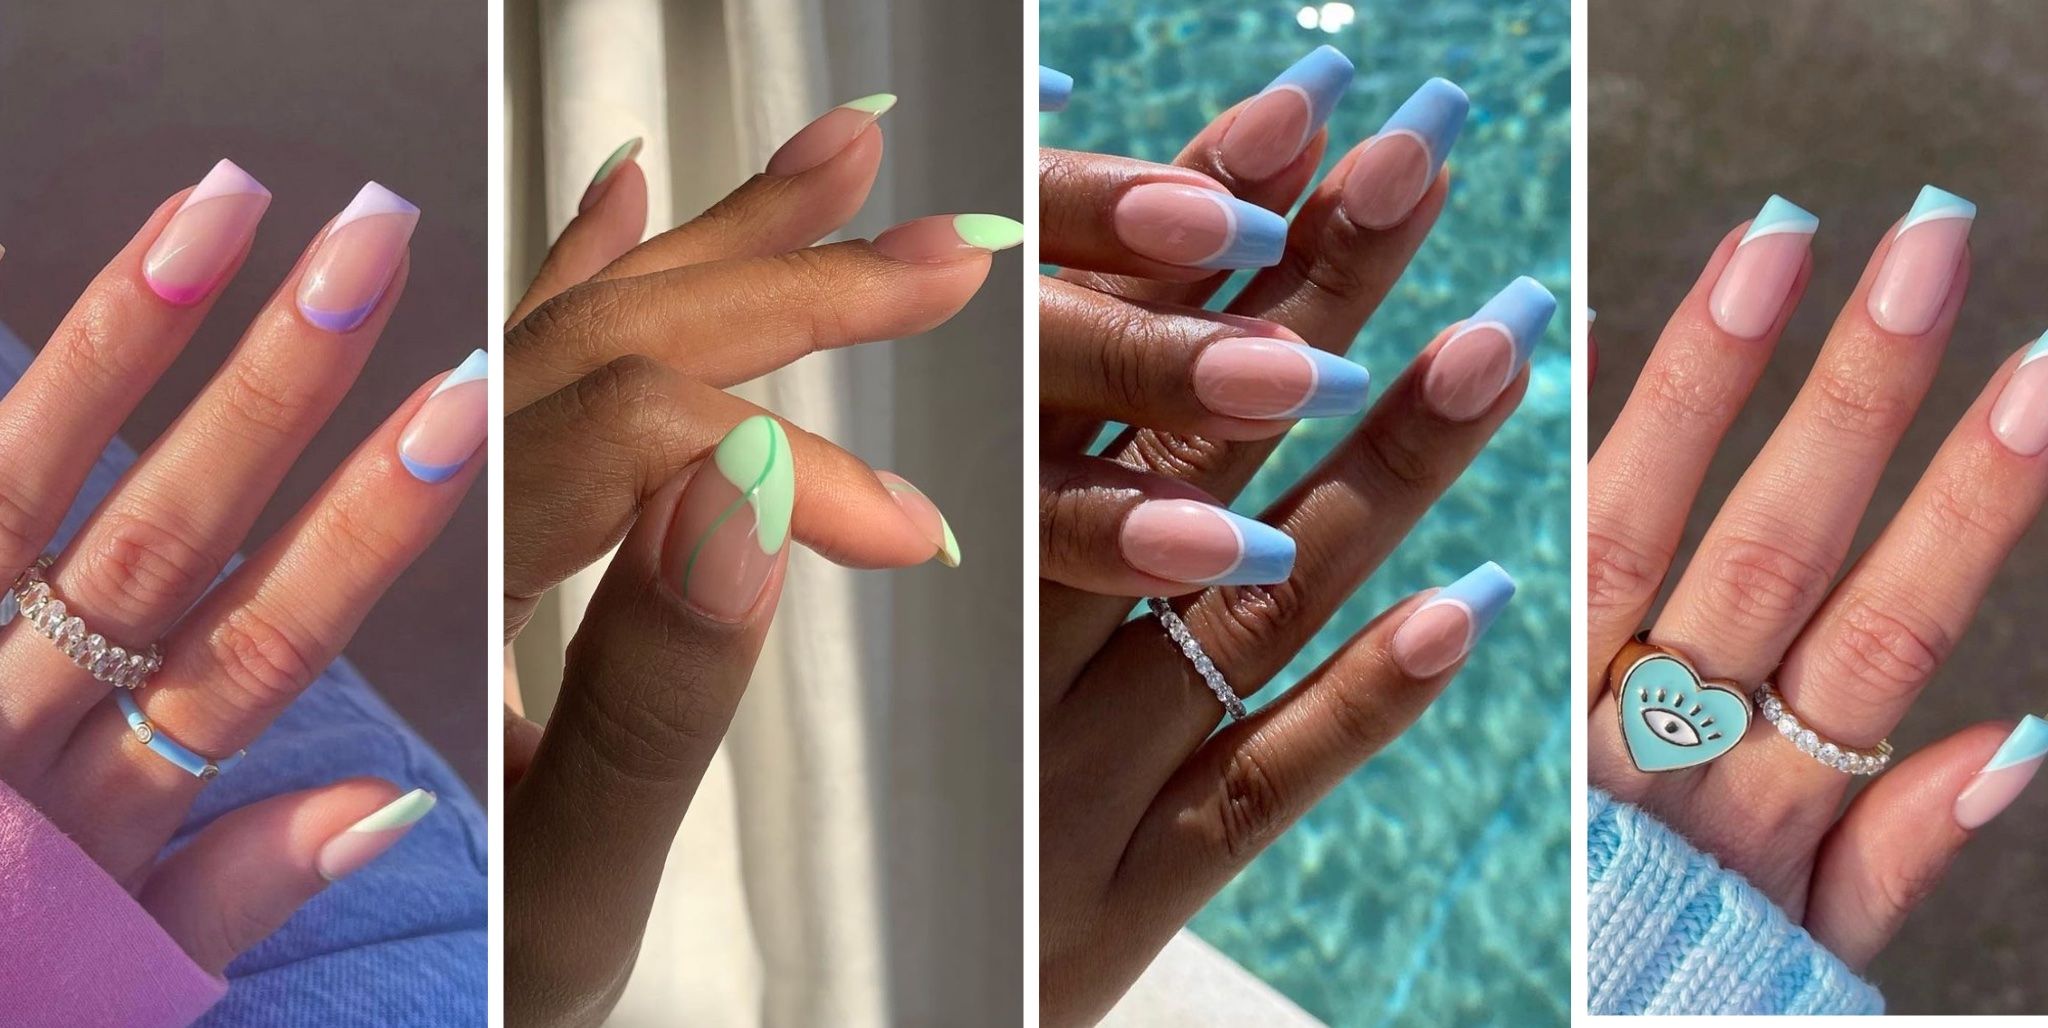 Builder Gel vs Acrylic Nails: How to Know Which Technique Is Right for You  - VIVA GLAM MAGAZINE™